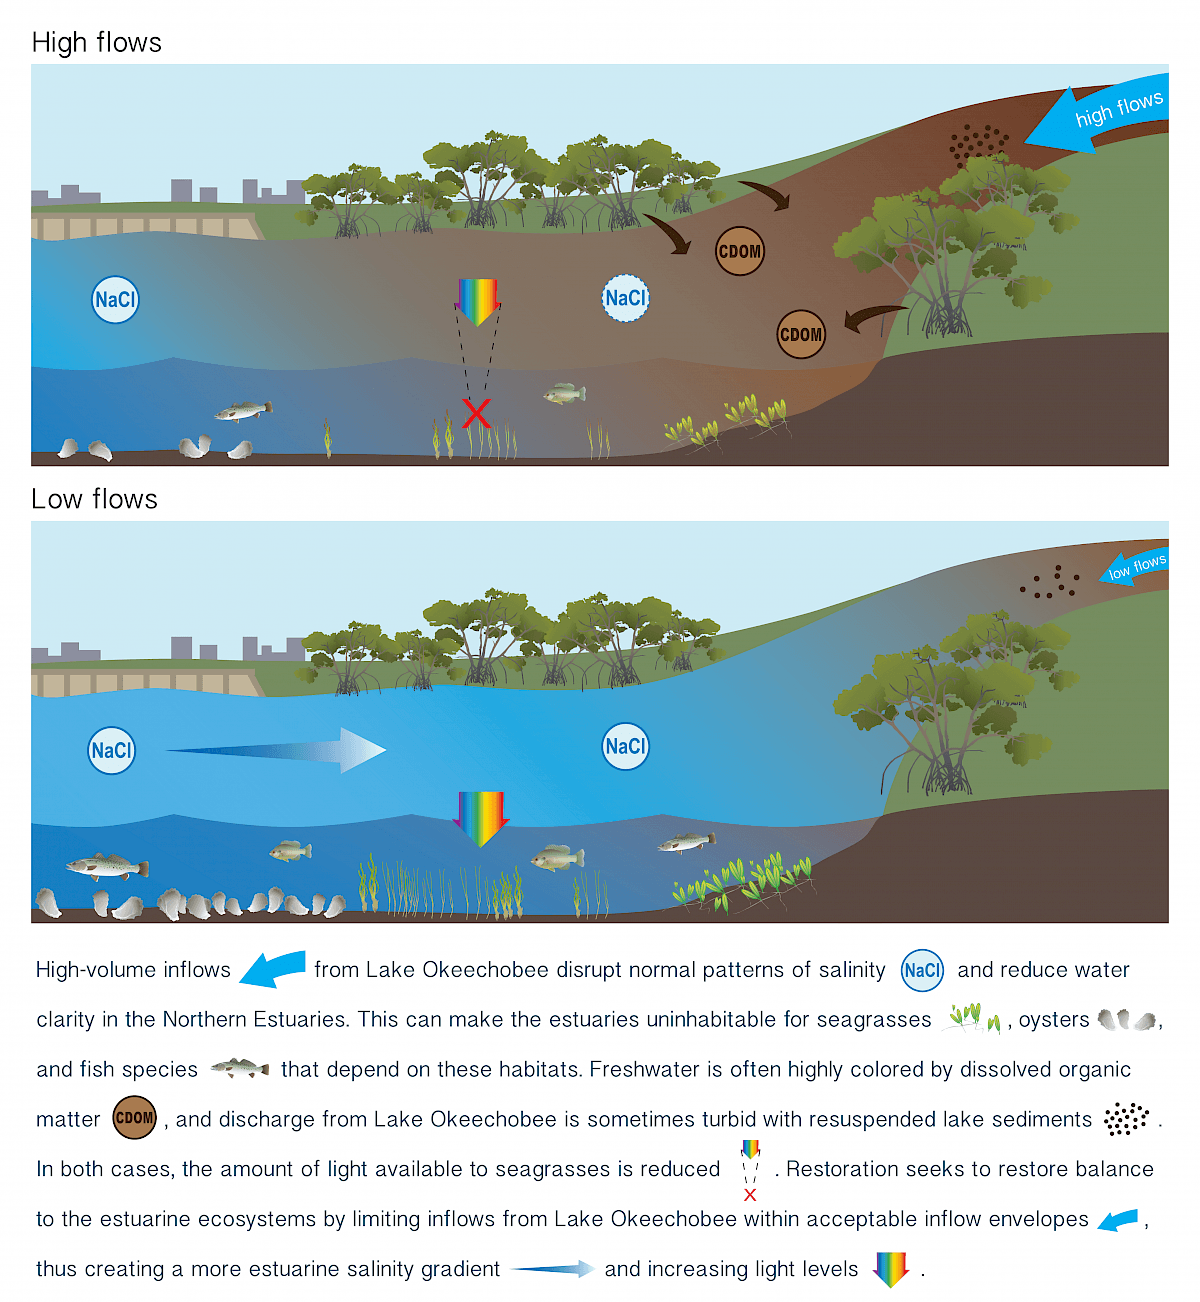 Graphic showing the high flow and low flow information. High-volume inflows from Lake Okeechobee disrupt the normal patterns of salinity and reduce water clarity in the Northern Estuaries. This can make the estuaries uninhabitable for seagrasses, oysters, and fish species that depend on these habitats. Freshwater is often highly colored by dissolved organic matter and discharge from Lake Okeechobee is sometimes turbid with resuspended lake sediments. In both cases, the amount of light available to seagrasses is reduced. Restoration seeks to restore balance to the ecosystem by limiting inflows from Lake Okeechobee with acceptable inflow envelopes, thus creating a more estuarine salinity gradient and increasing light levels.